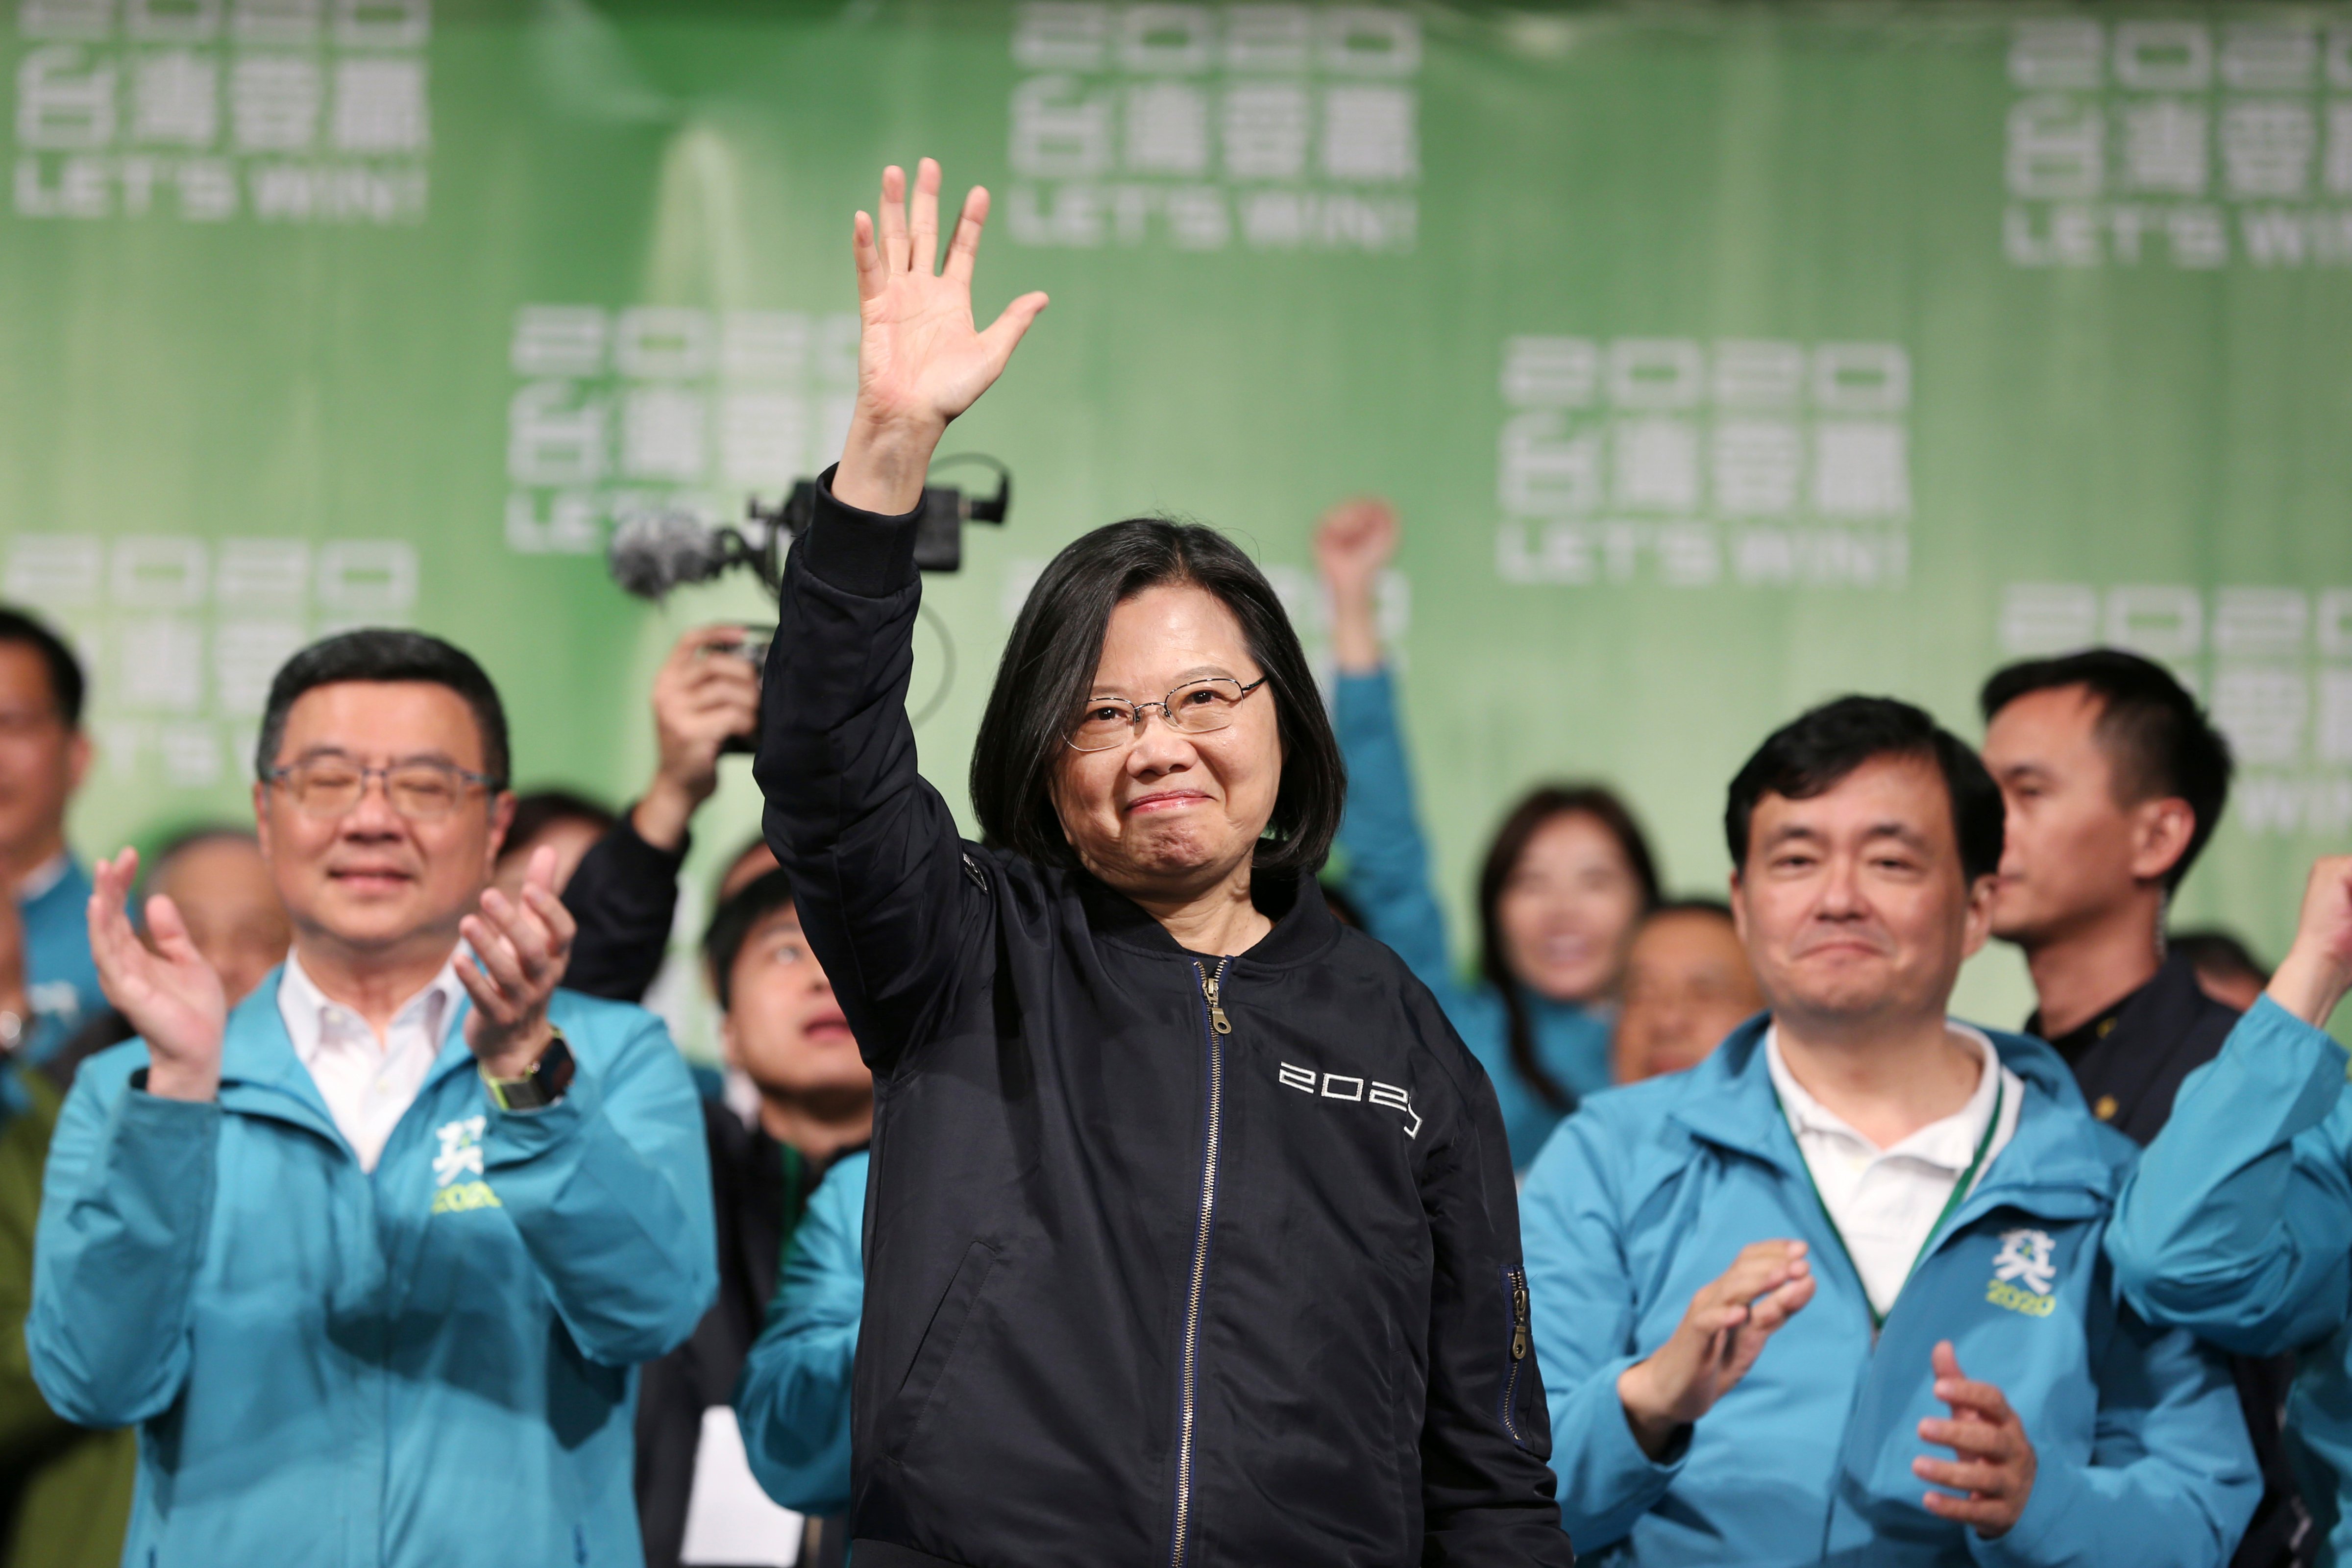 Taiwan's 2020 presidential election candidate, Taiwanese President Tsai Ing-wen celebrates her victory with supporters in Taipei, Taiwan, on Jan. 11, 2020. (Chiang Ying-ying—AP)